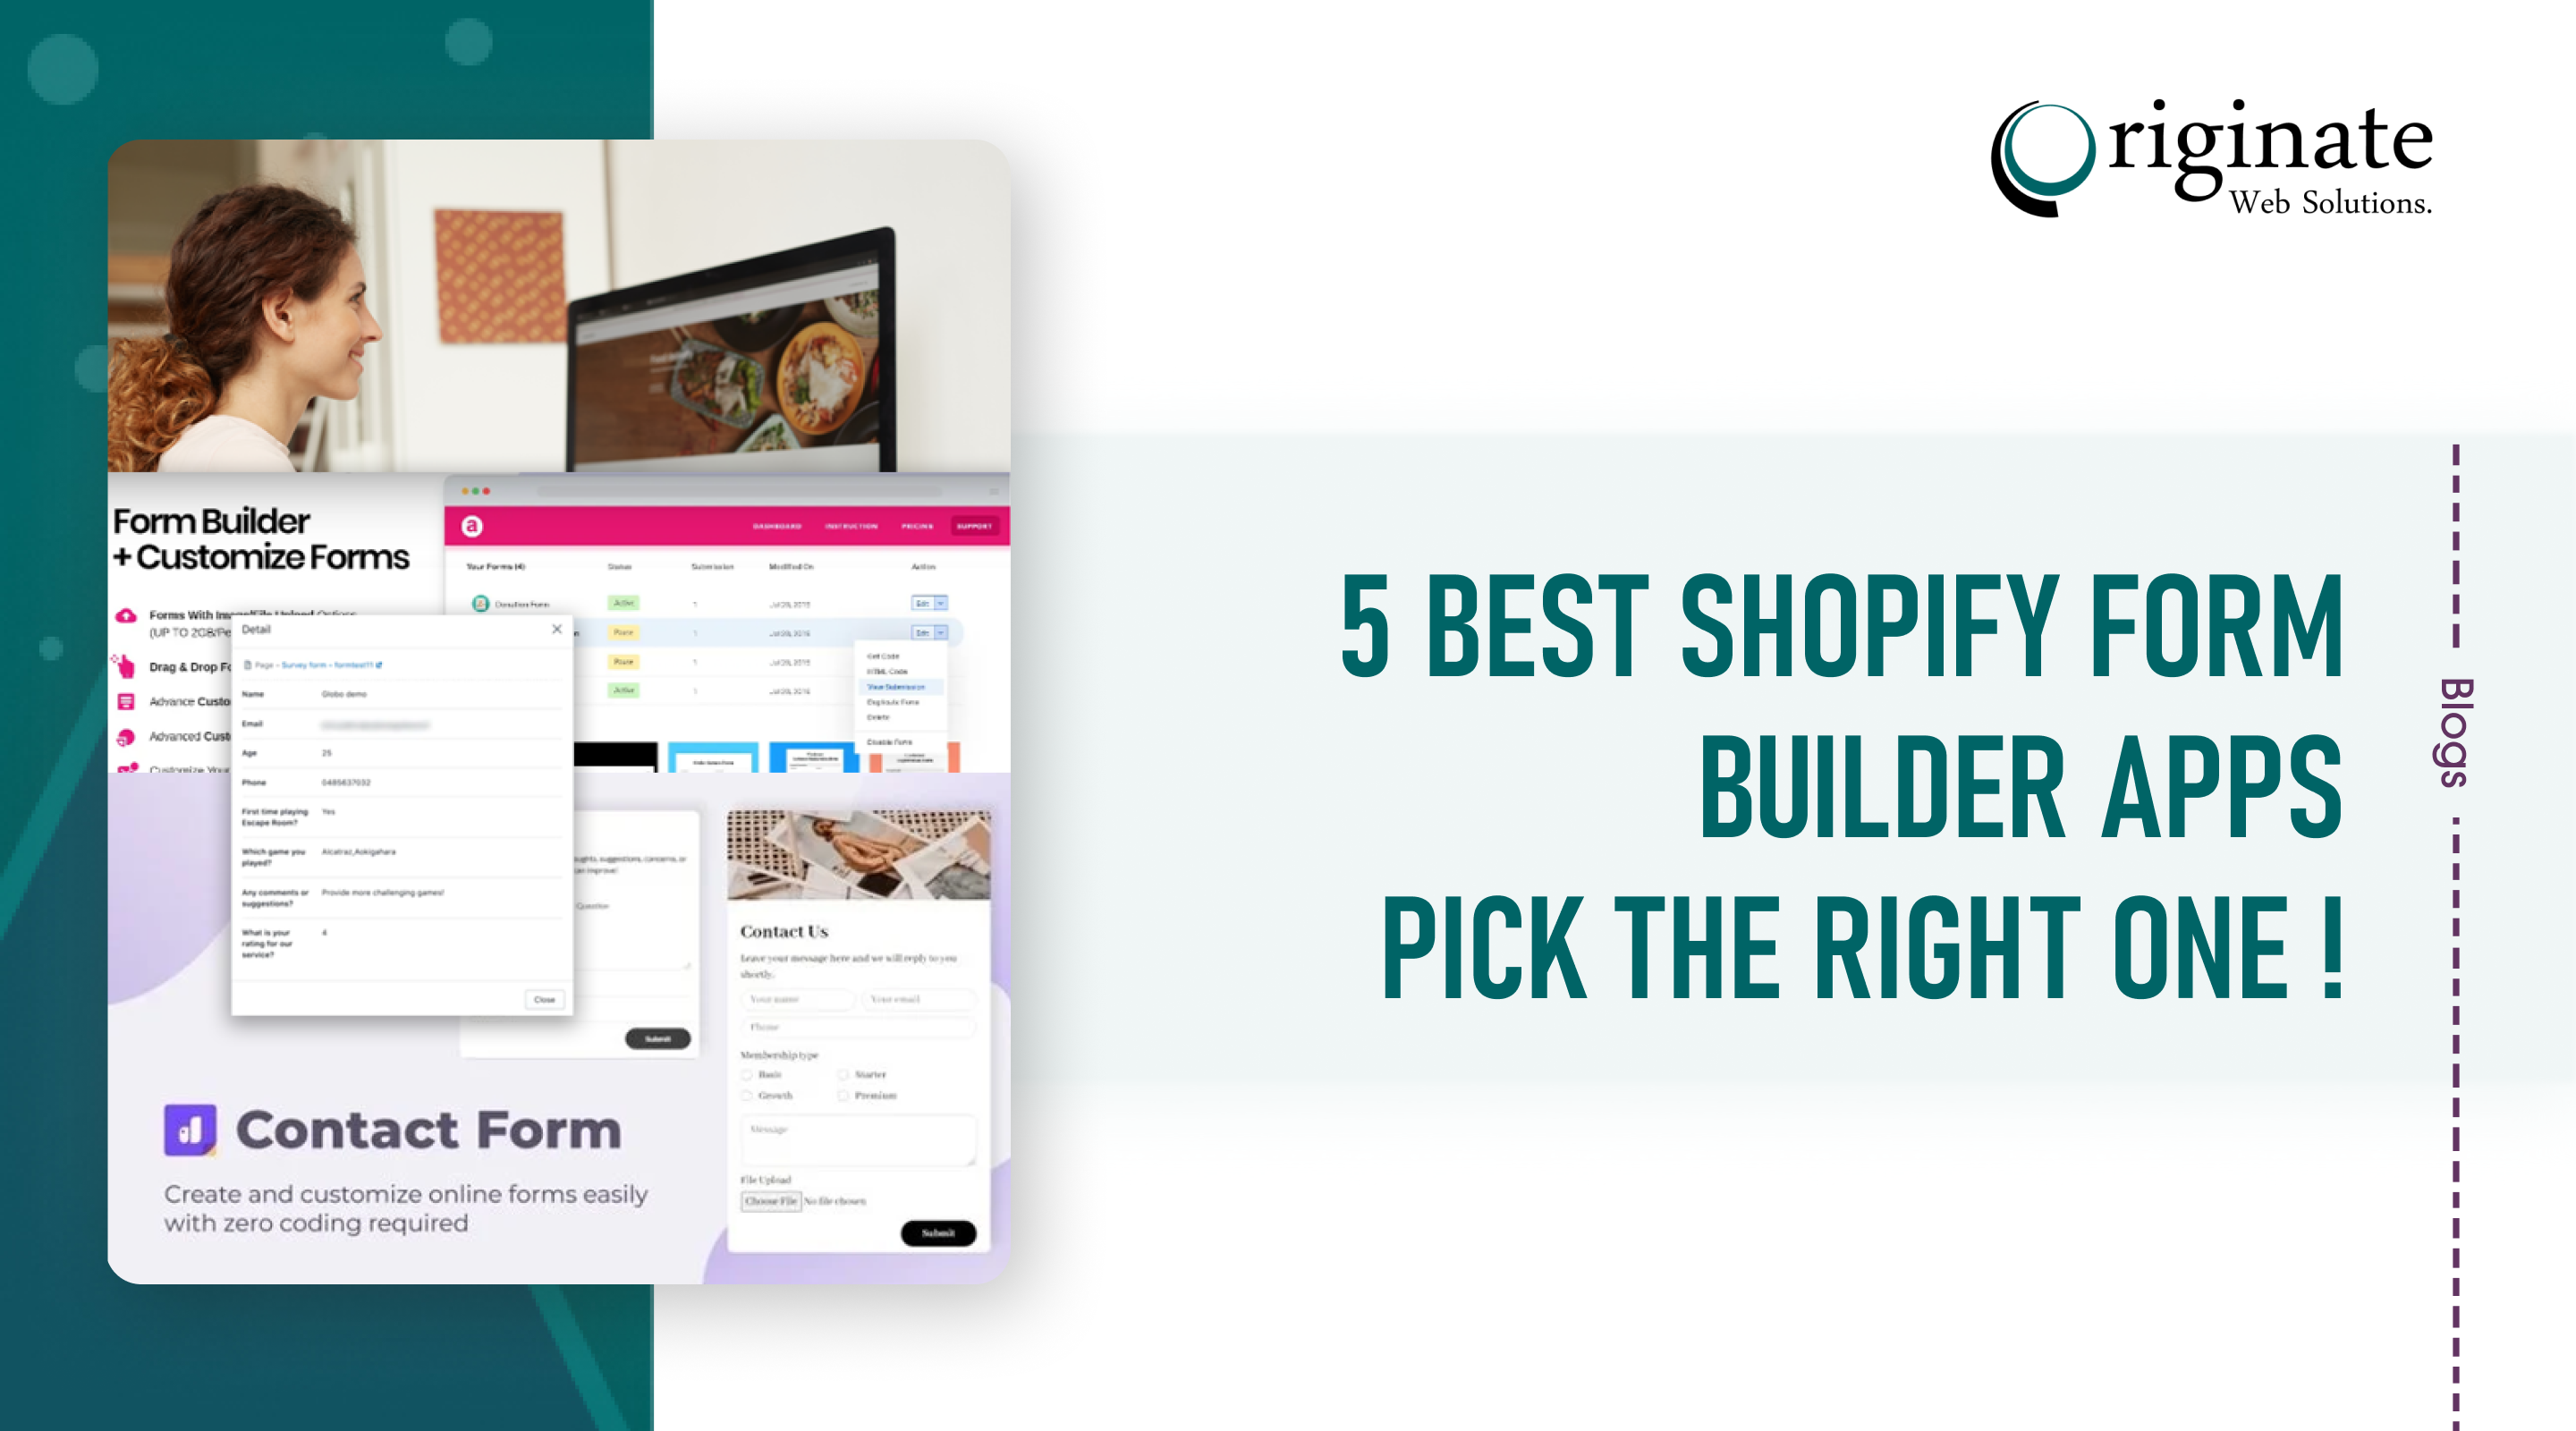 5 Best Shopify Form Builder Apps- Pick The Right One!